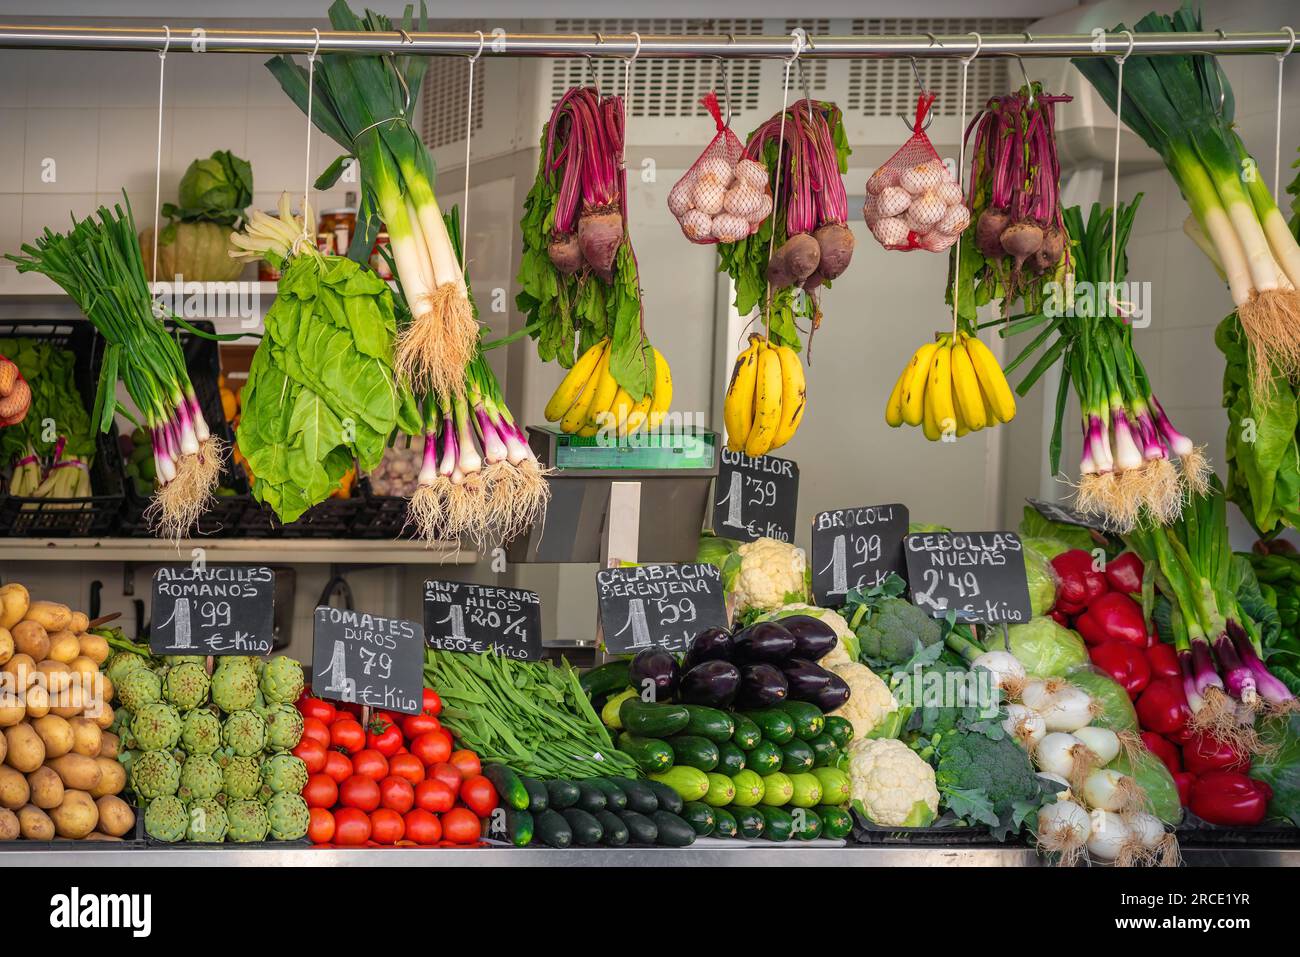 Fruit and Vegetables Market Stall in Spain Stock Photo